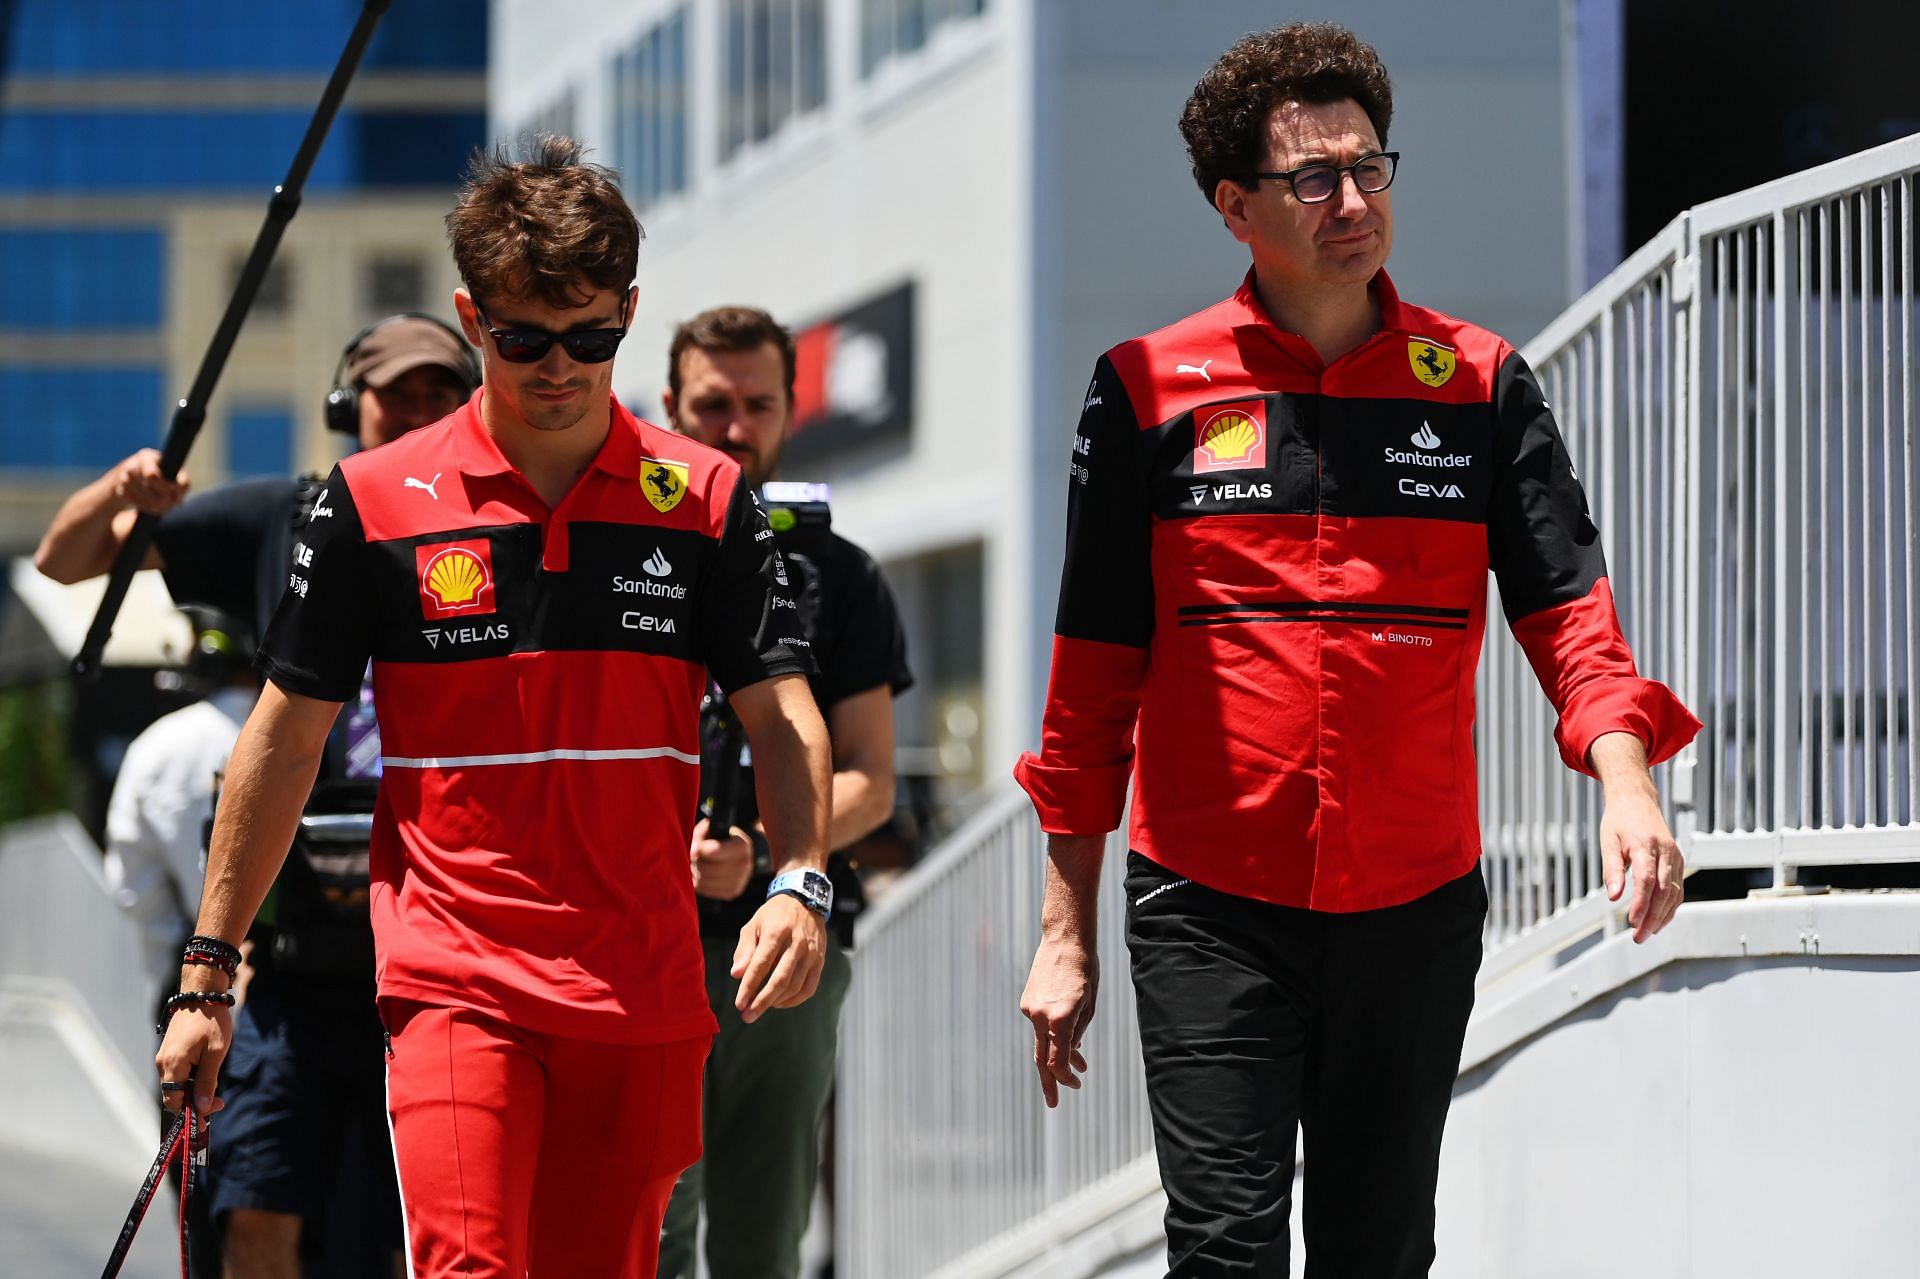 Ferrari is in a must-win situation at the 2022 F1 Canadian GP